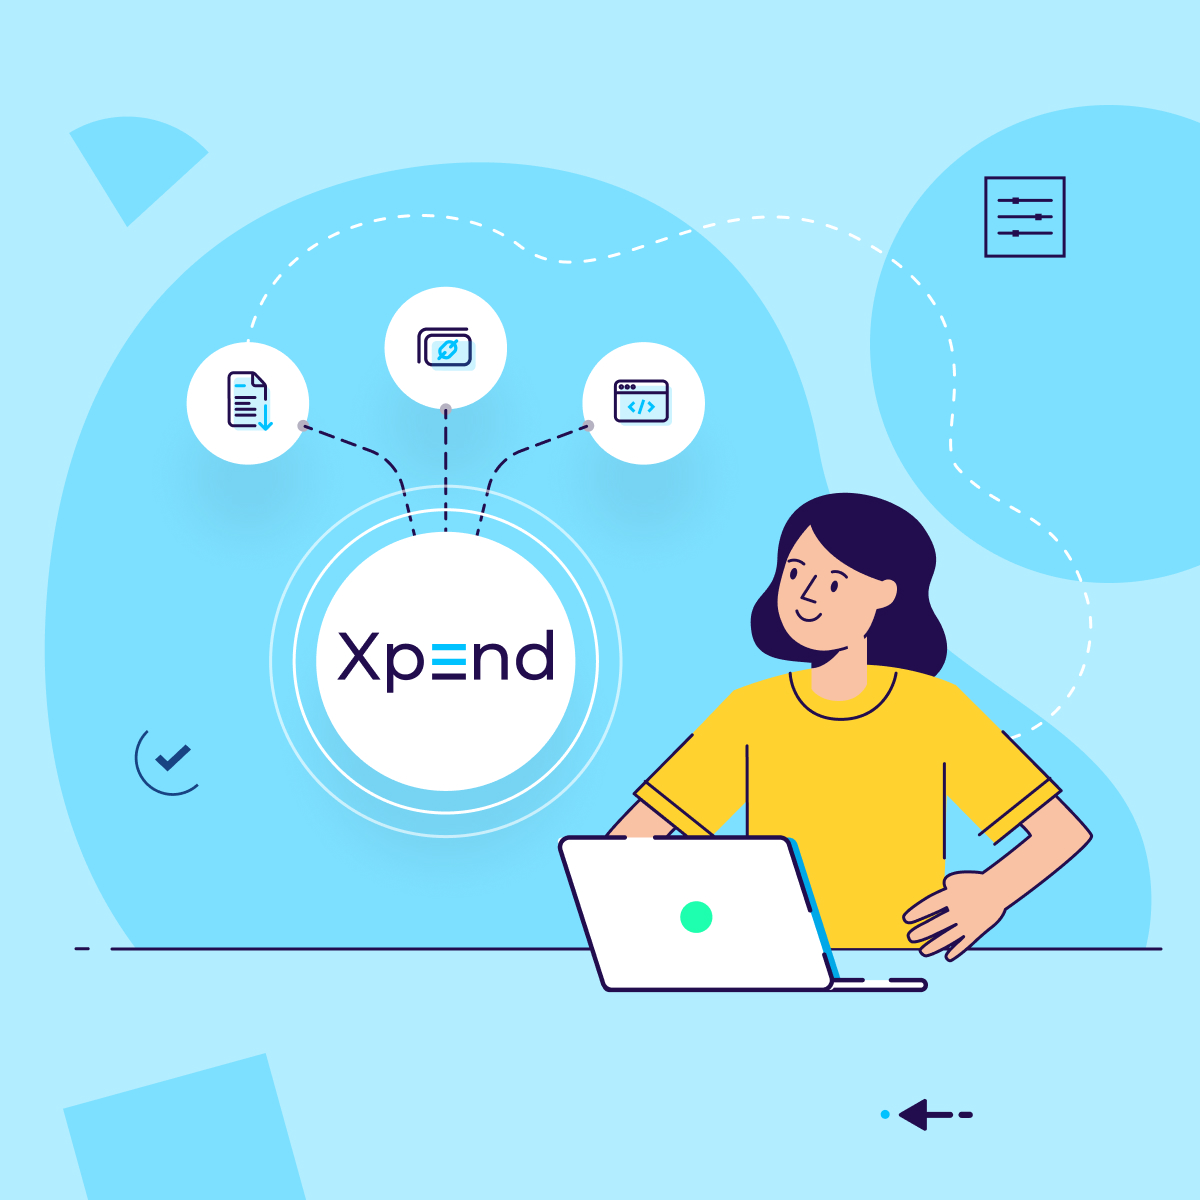 Xpend 発表 - 新コスト集約ソリューション | AppsFlyer